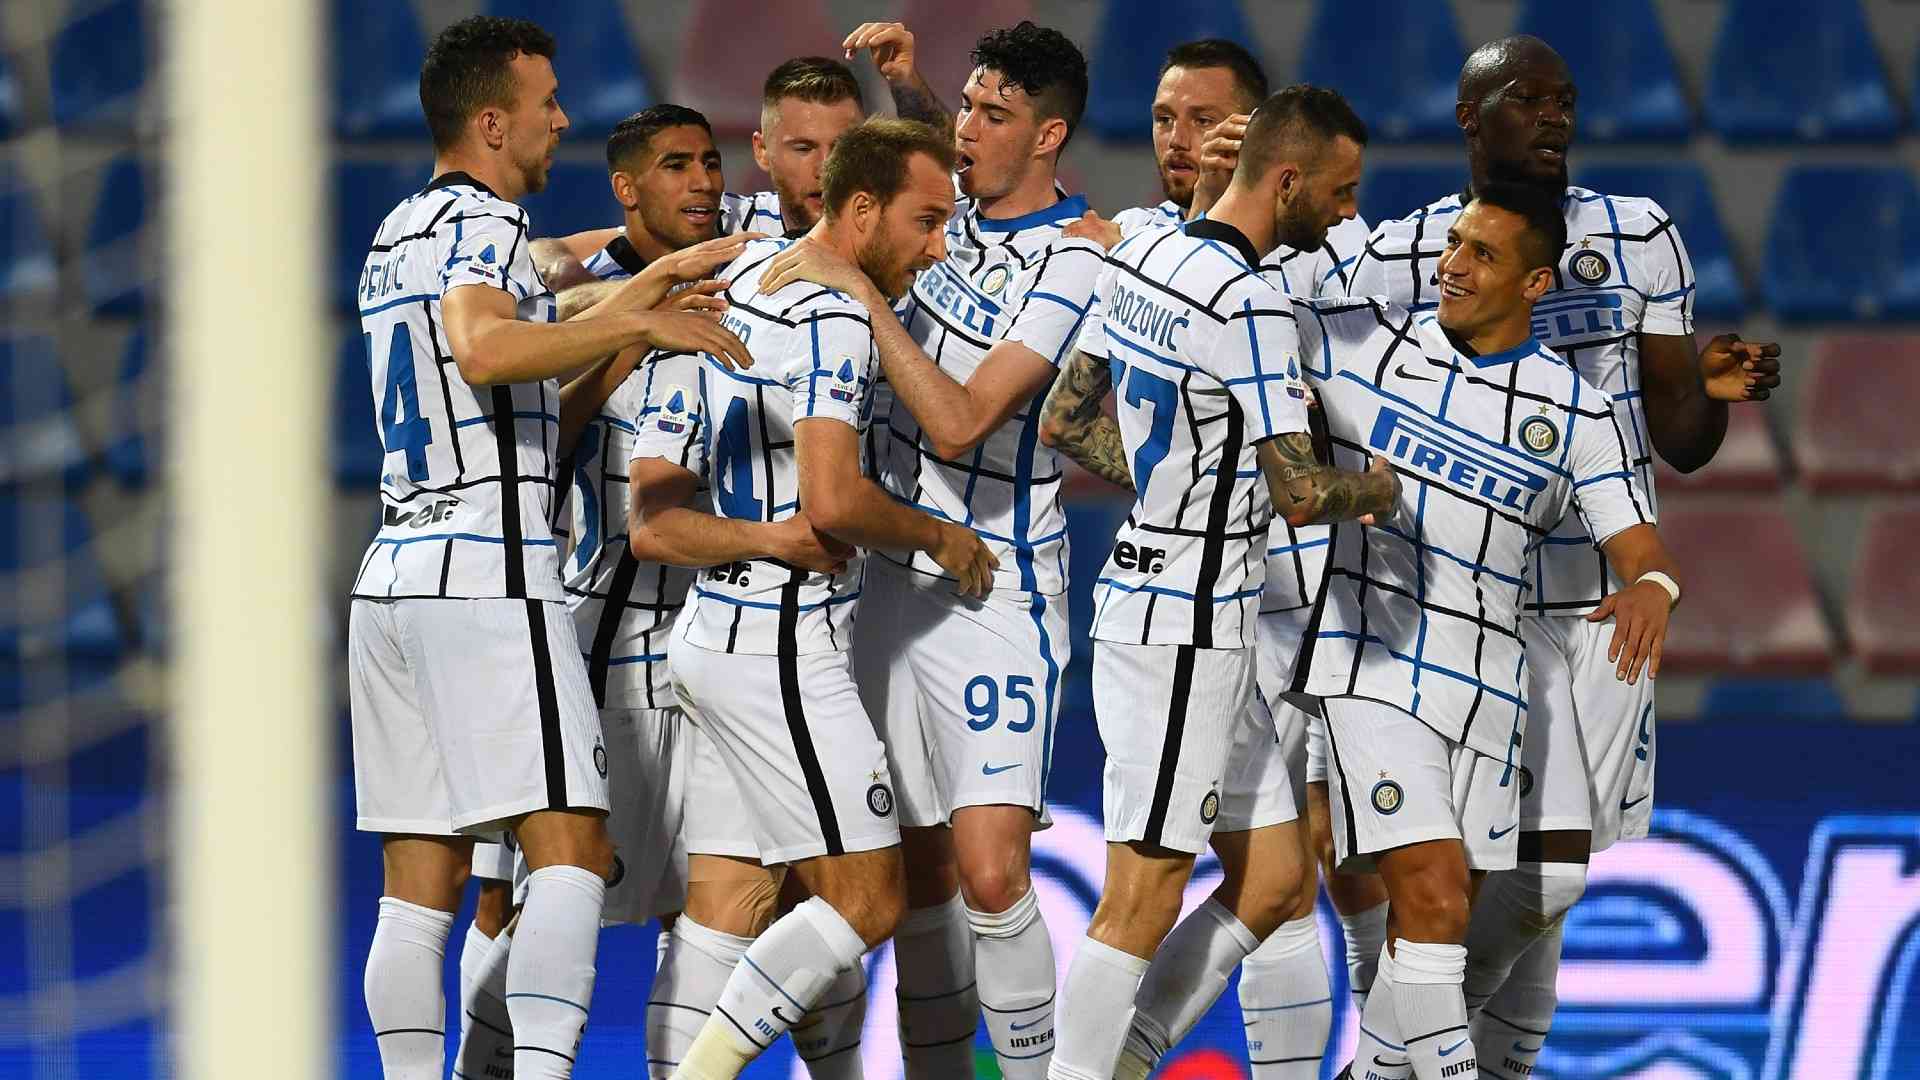 Inter Milan on the cusp of winning Scudetto after beating Crotone 0-2 on Saturday; Credit: Twitter/@Inter_en